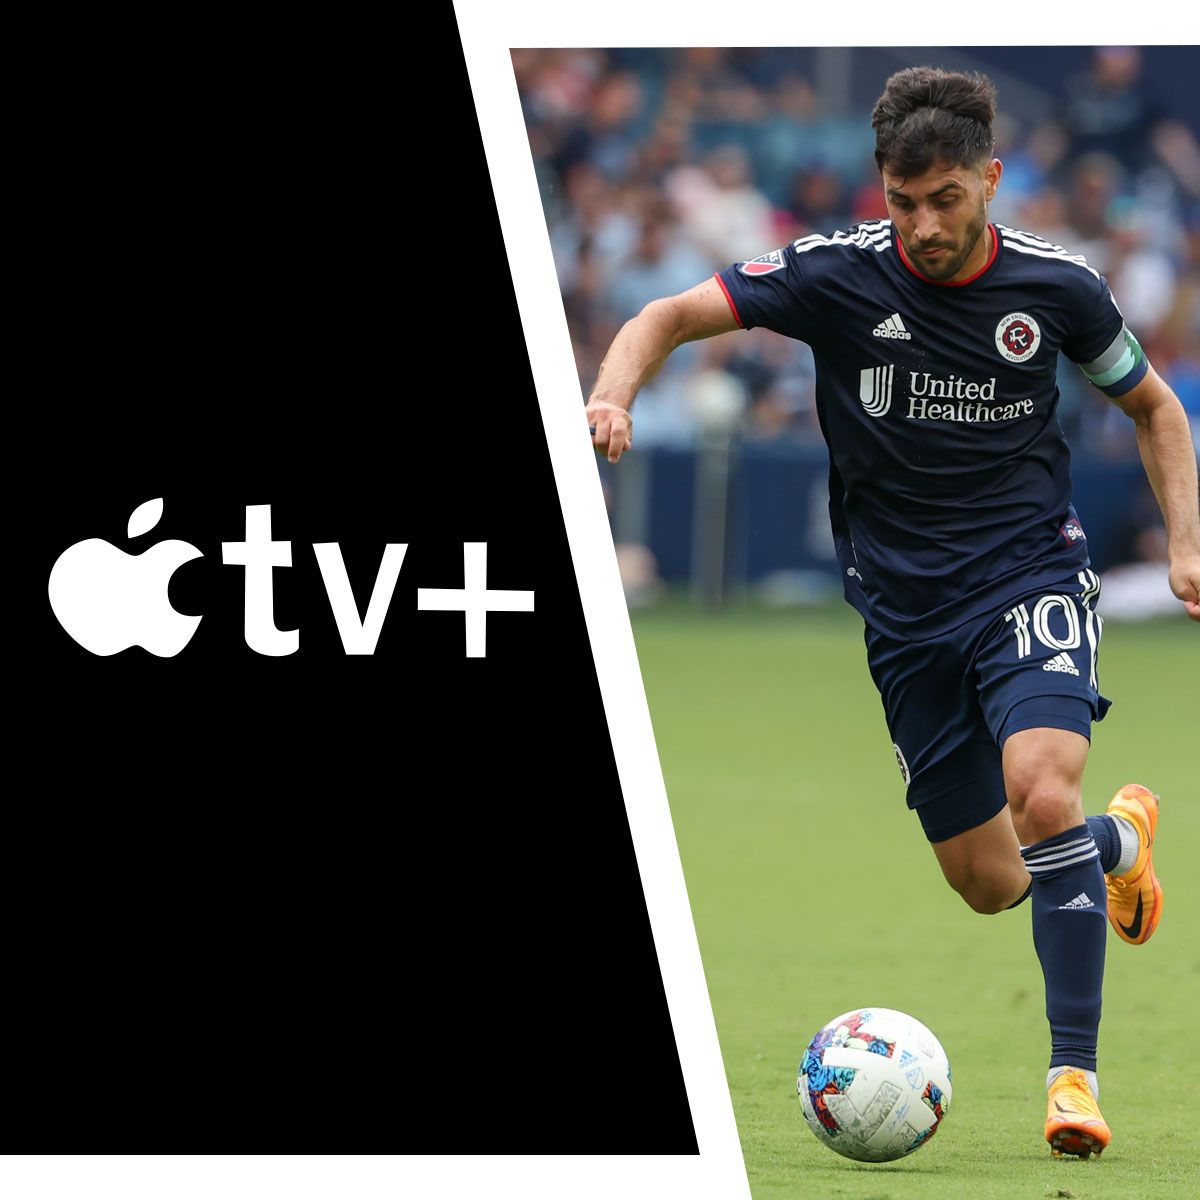 Apple TV and MLS to Show Live Soccer in 10-Year Deal